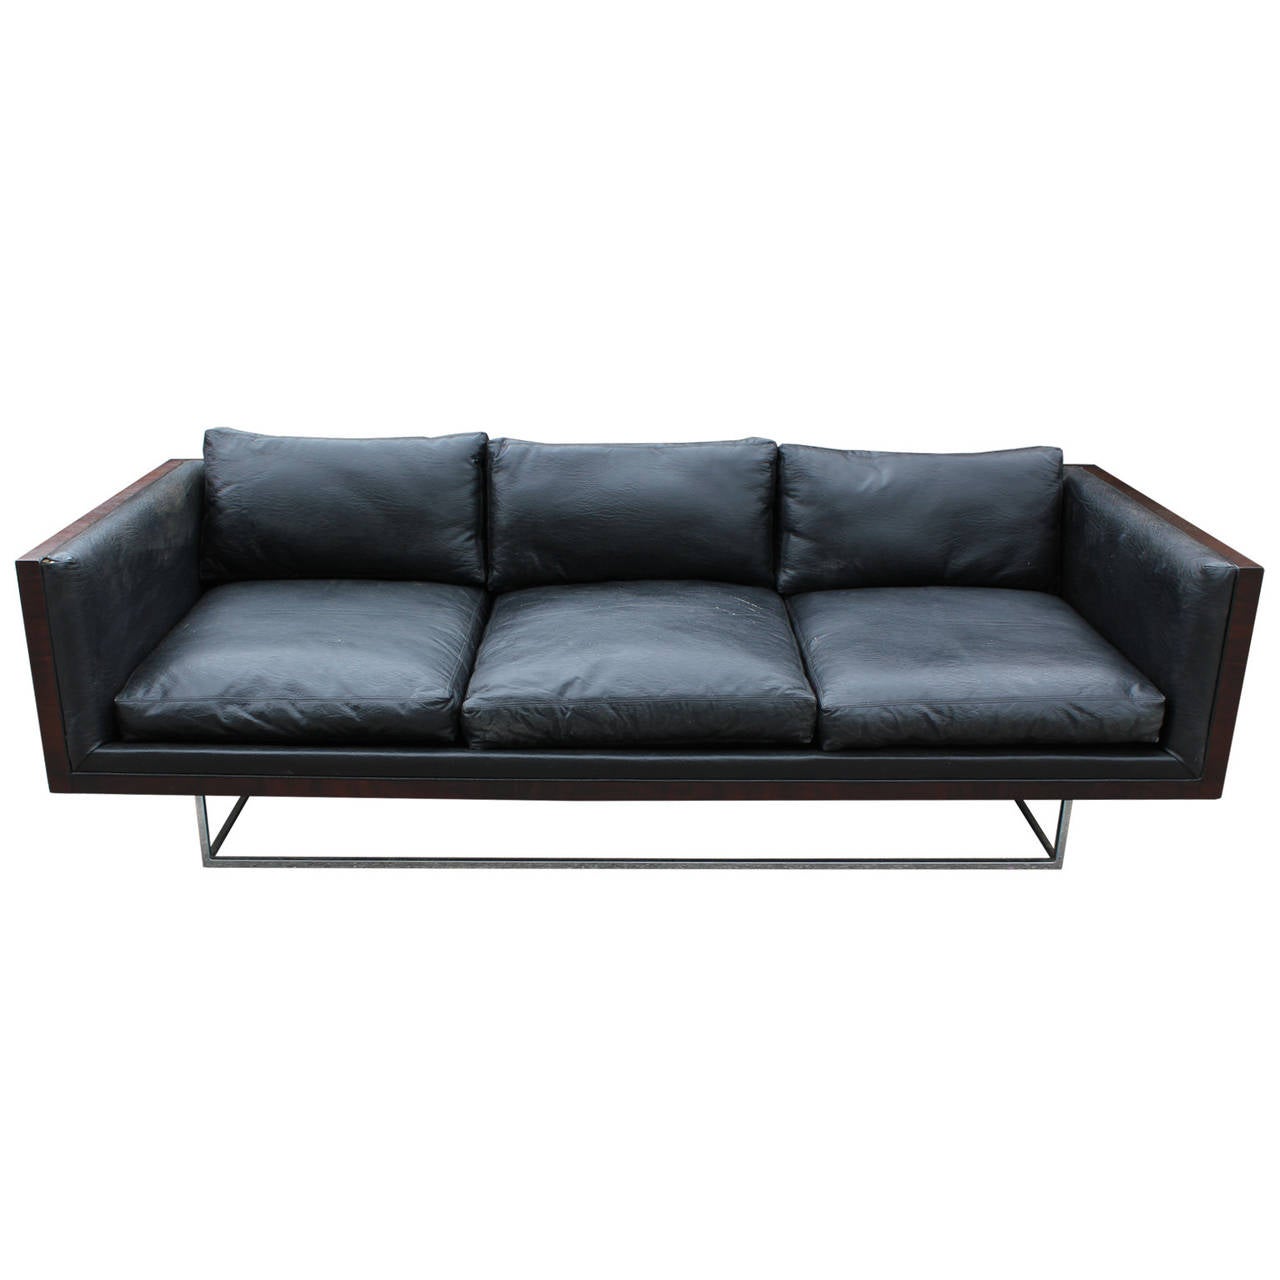 Sleek three-seat sofa by Milo Baughman for Thayer Coggin. Sofa has a stunning burl wood case and sits atop a floating chrome base. Sofa retains original black vinyl upholstery but re-upholstery is recommended. Burl case has been restored. Sofa has